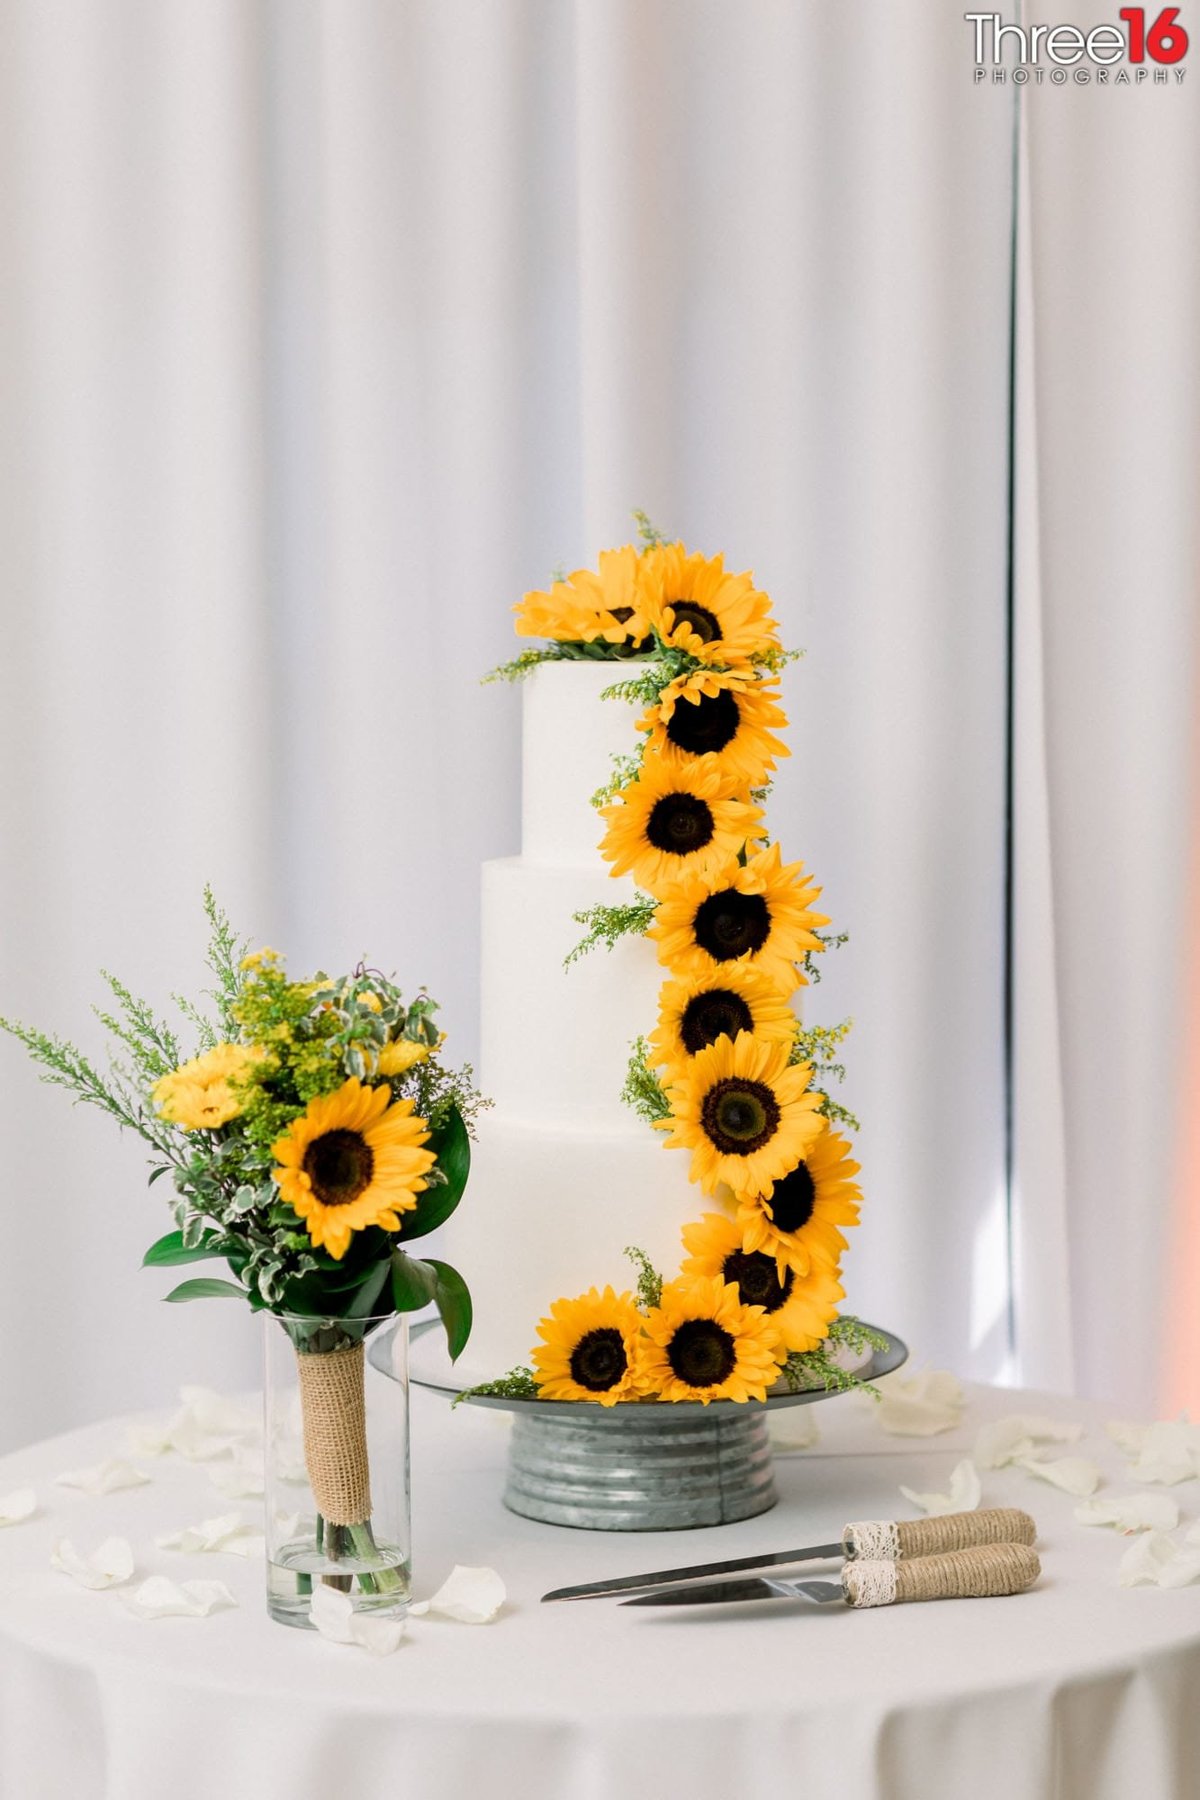 Unique three-tiered wedding cake with sunflowers draping down